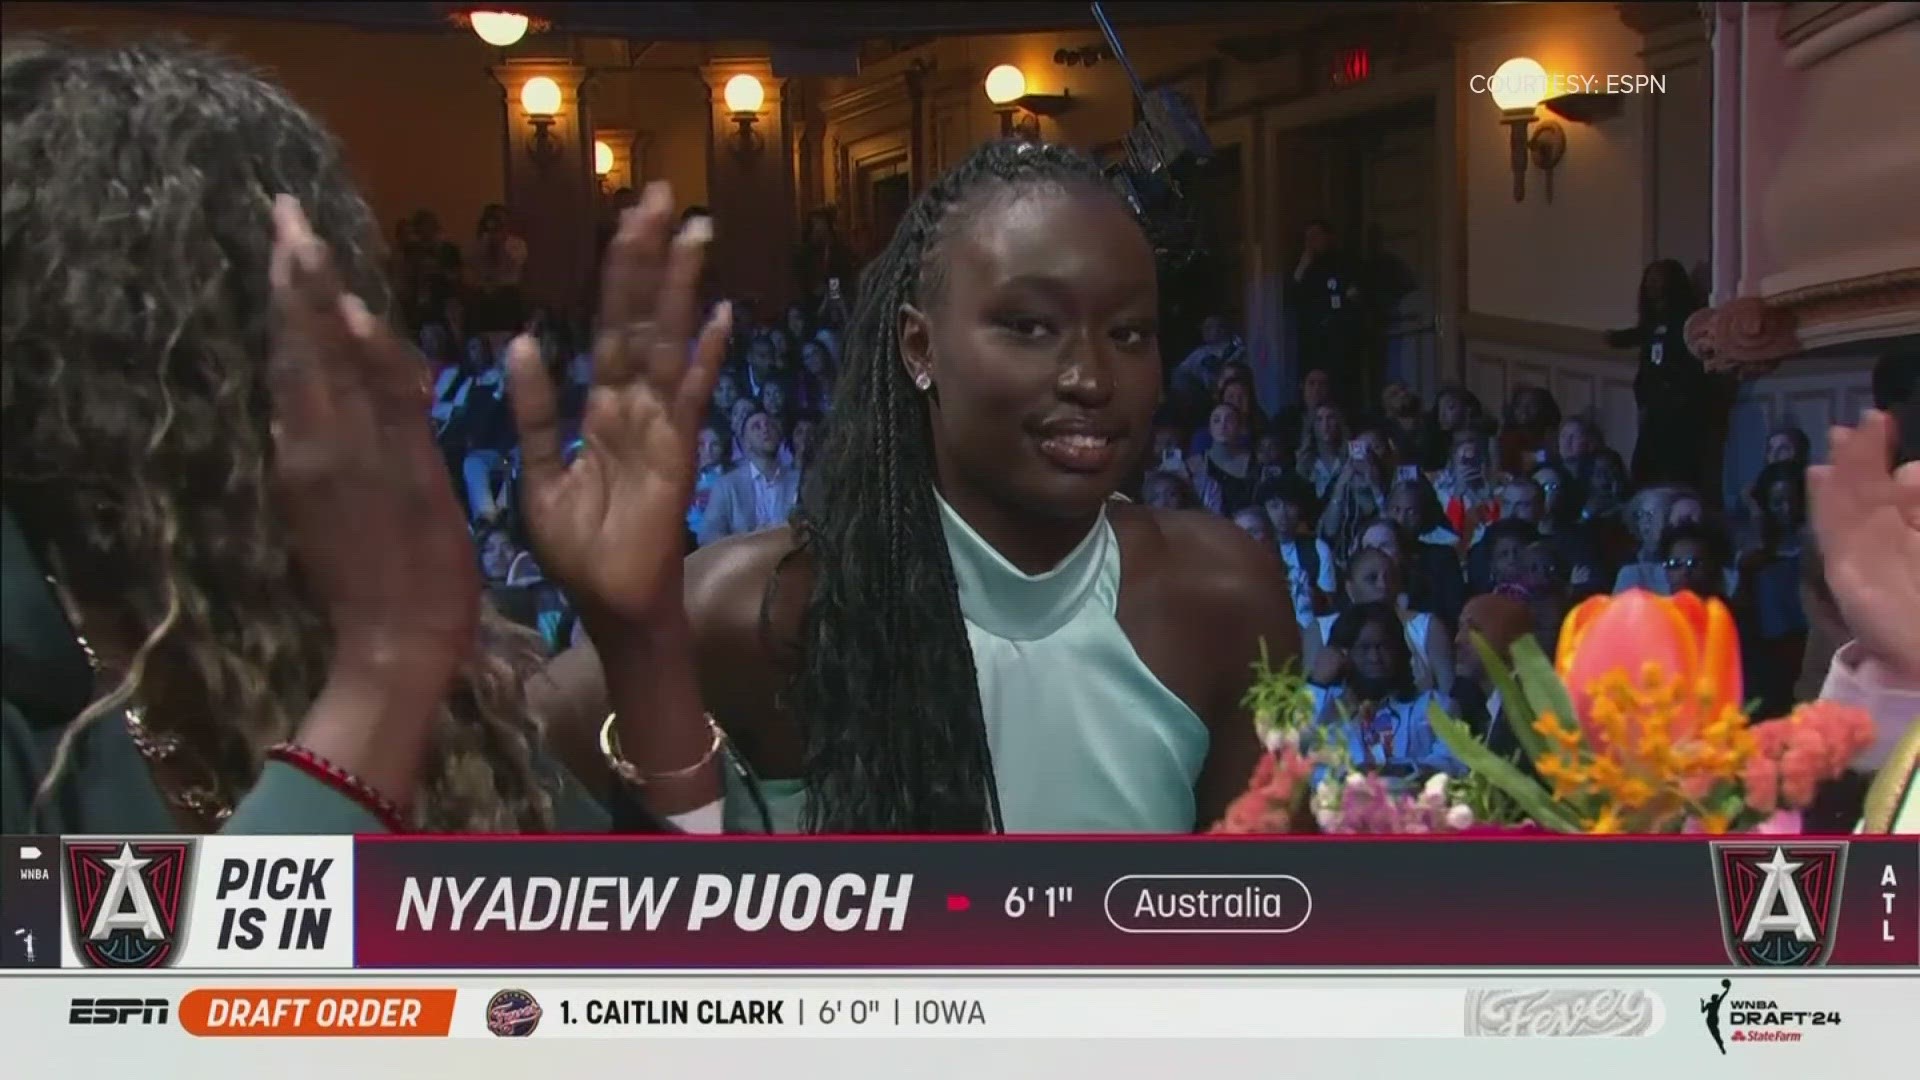 In the first round, the Atlanta Dream selected Nyadiew Puoch, of Australia with its No. 12 pick.